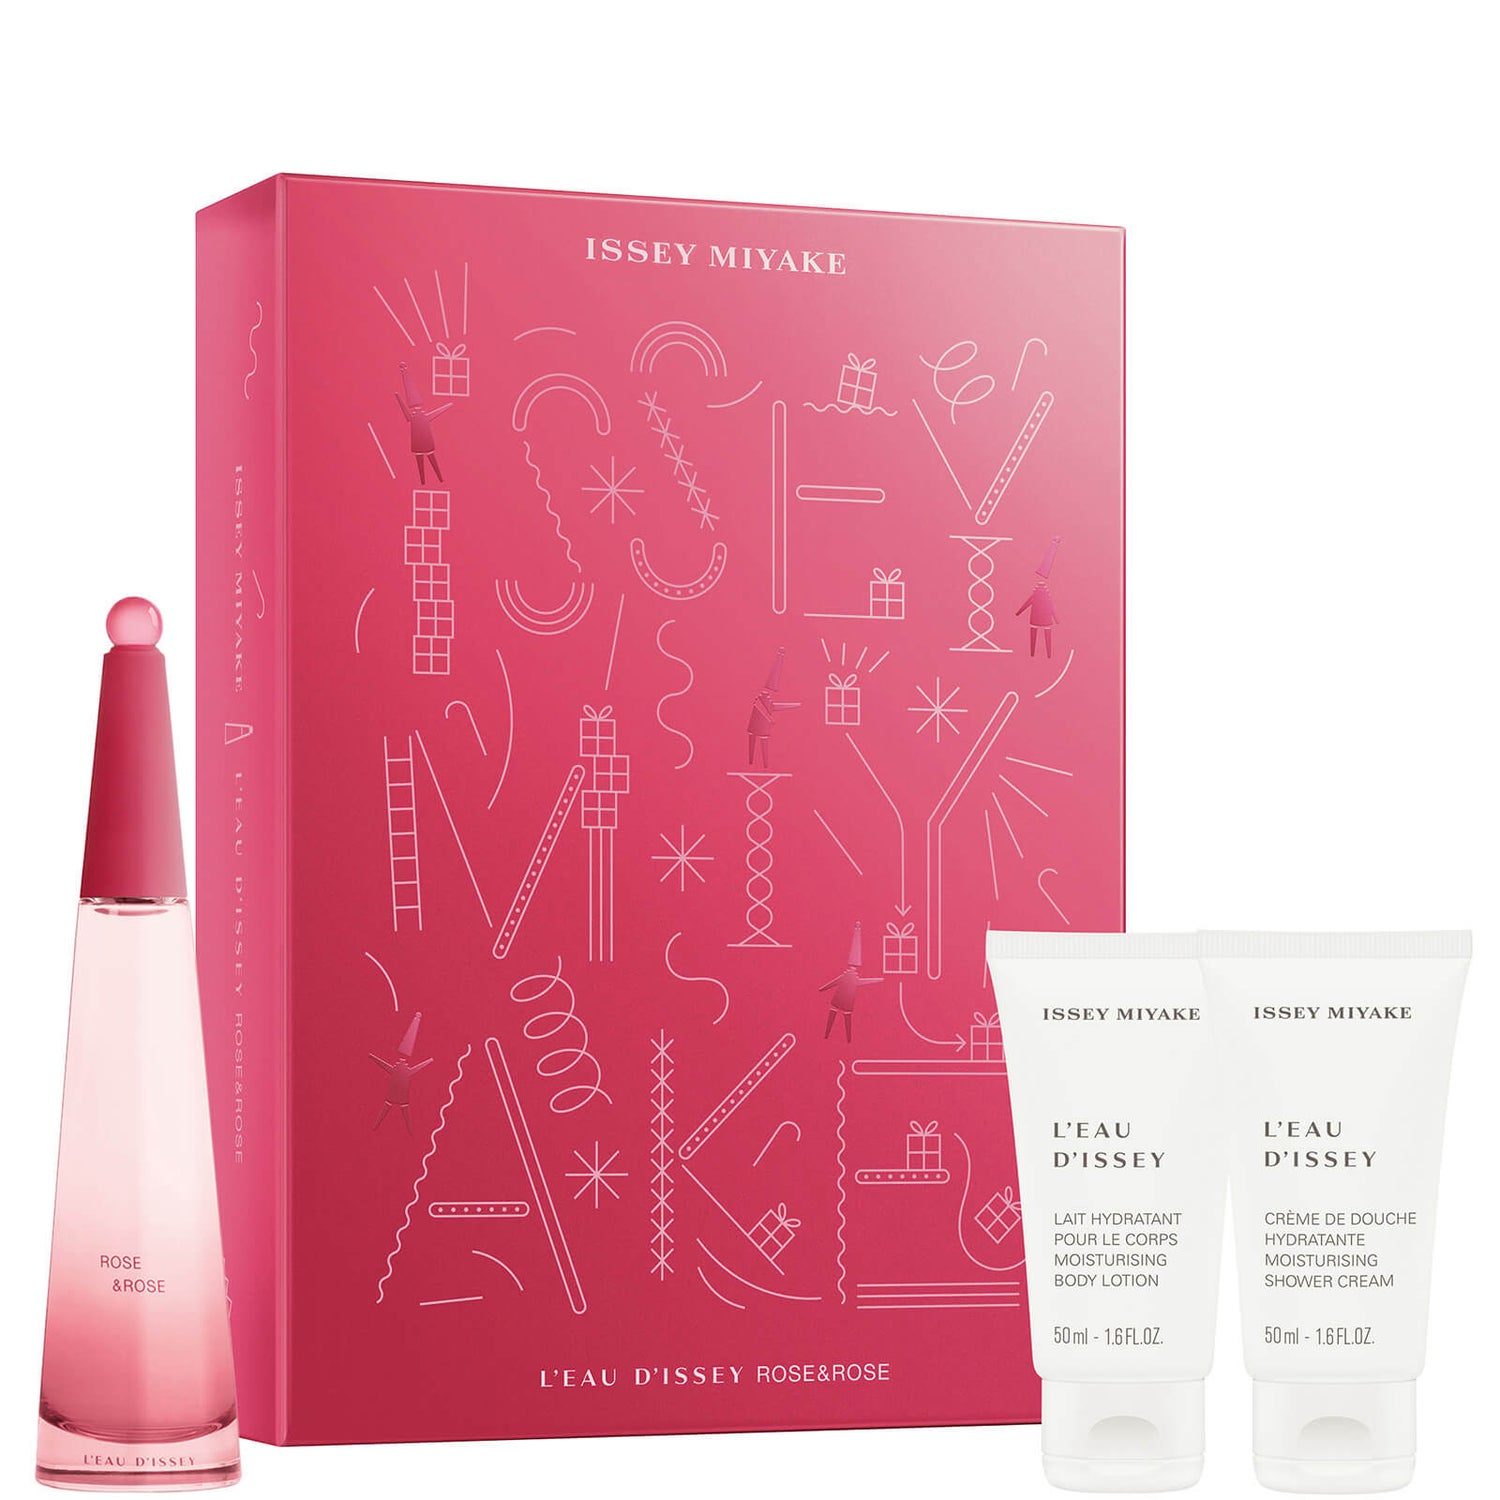 Issey Miyake L'Eau d’Issey Rose & Rose Set Issey Miyake L'Eau d'Issey Rose & Rose sada